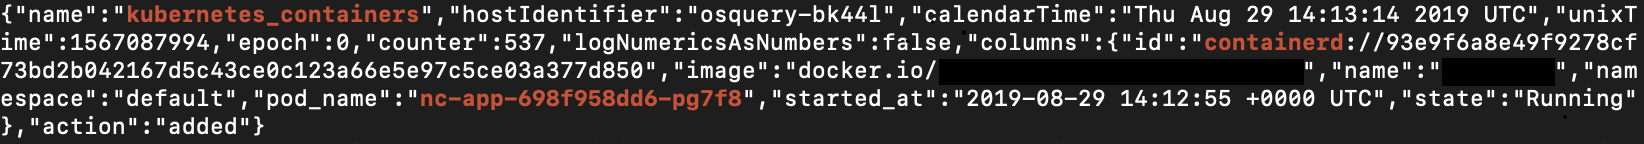 Screen capture of output of kubernetes_container query